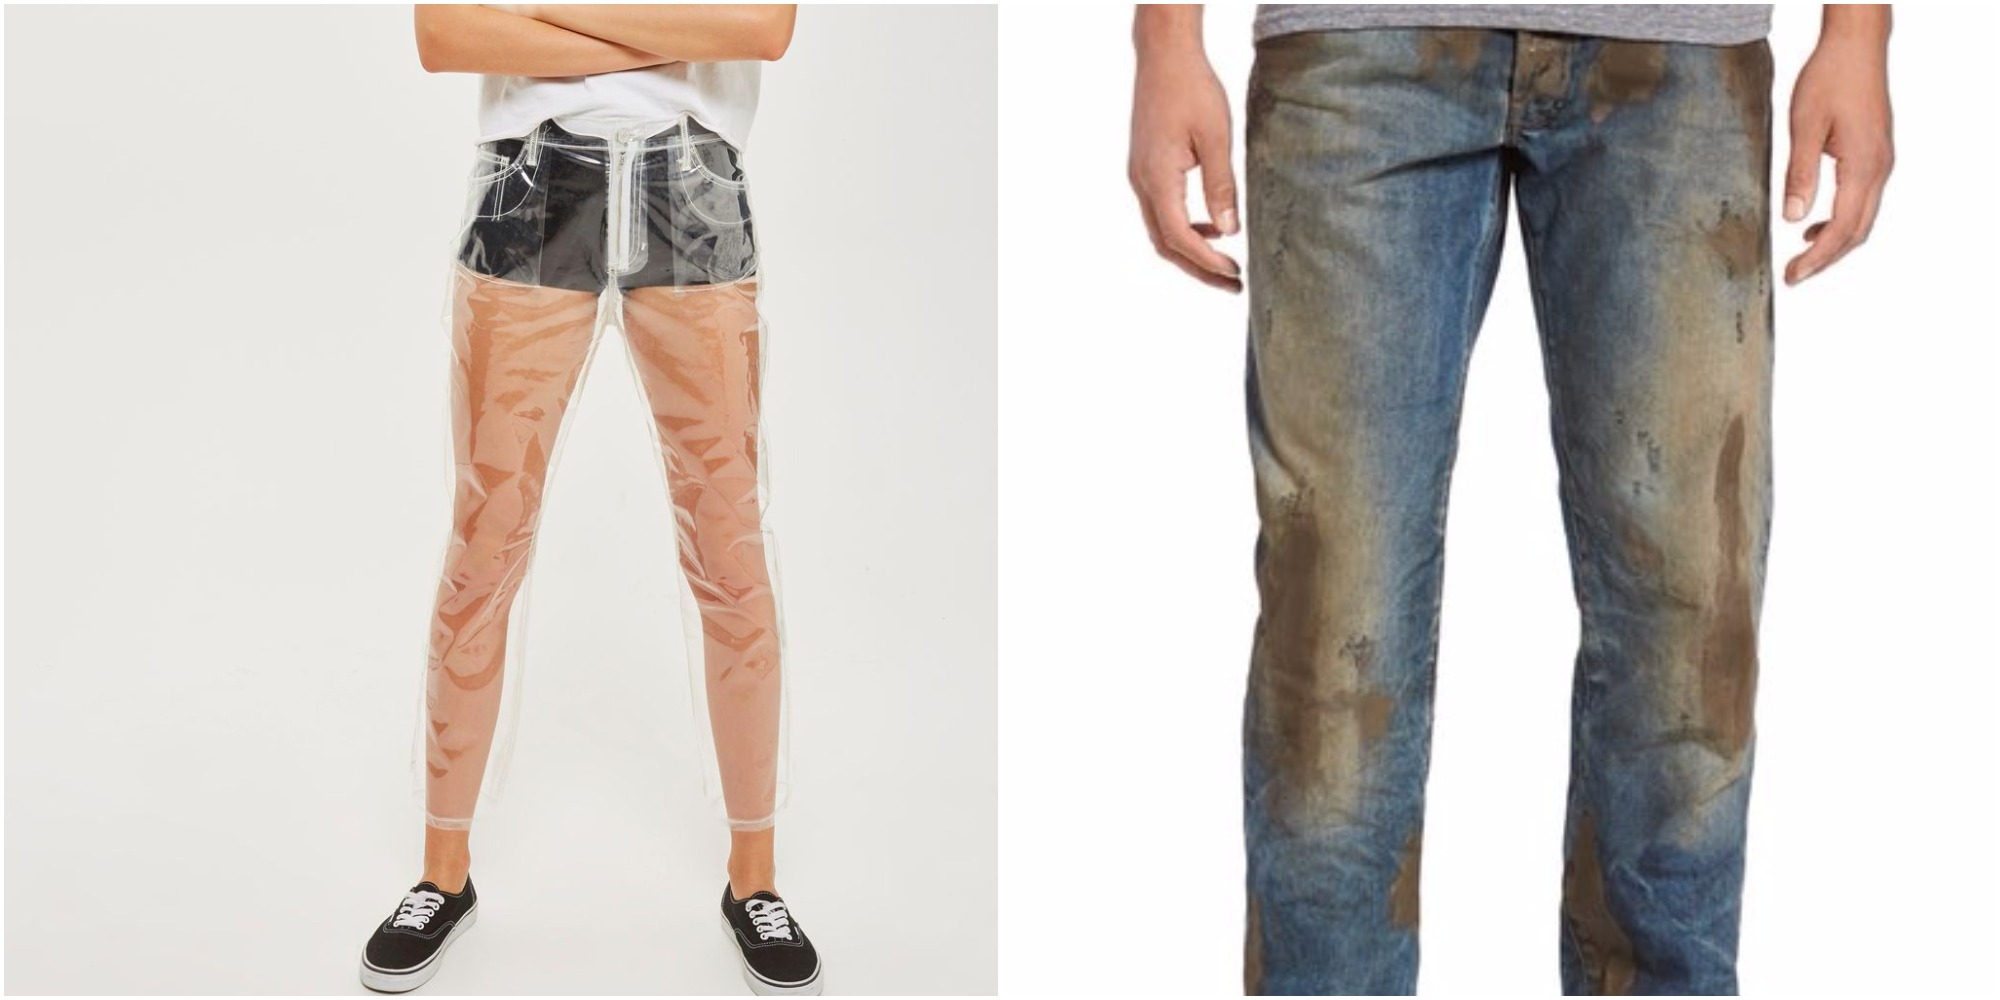 Today In WTF Fashion: TopShop Sells Clear ‘Jeans’ While Nordstrom Charges $425 For ‘Muddy’ Ones